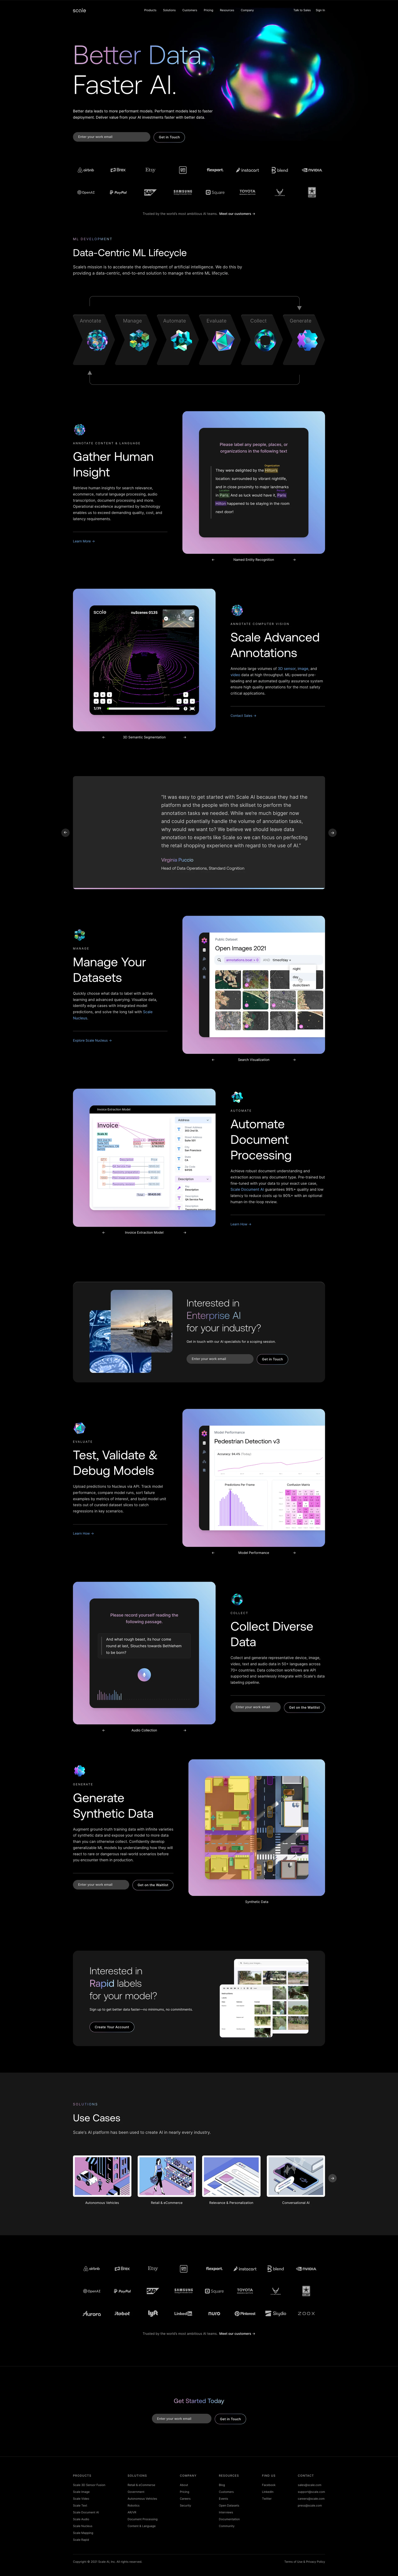 Scale AI Landing Page Example: The Data Platform for AI. Better data leads to more performant models. Performant models lead to faster deployment. Deliver value from your AI investments faster with better data.